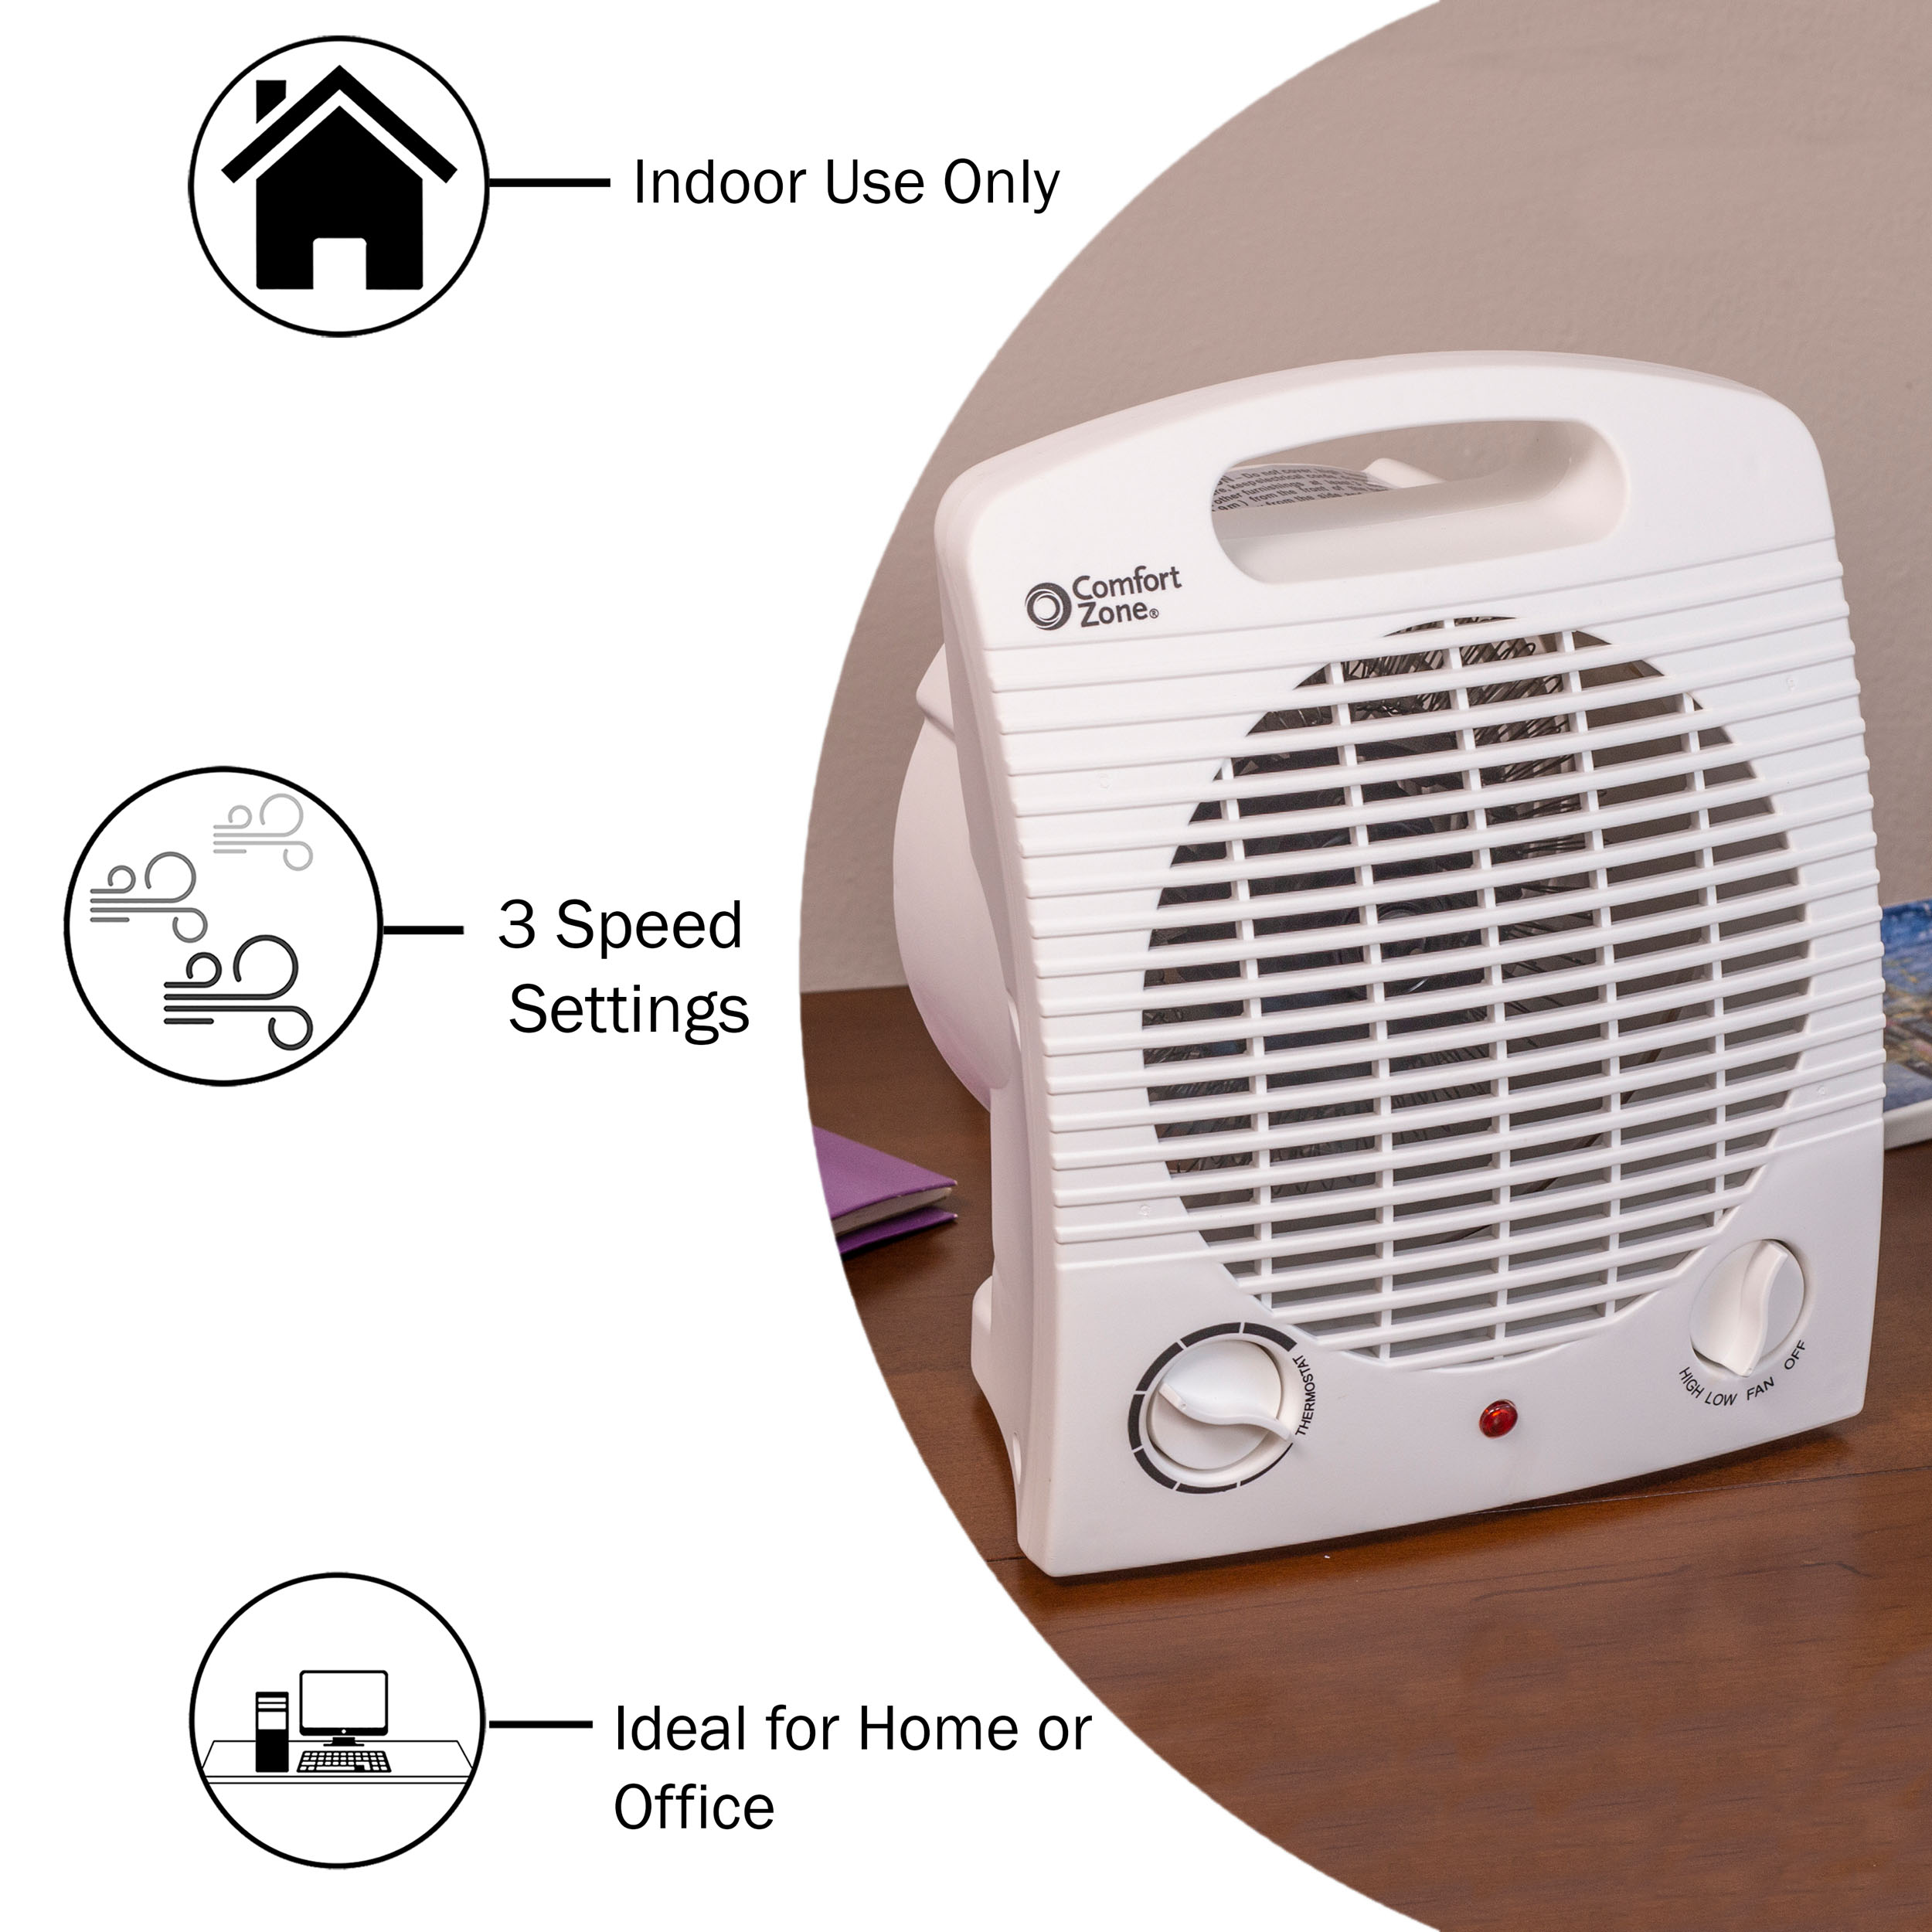 Comfort Zone 750/1,500-Watt Portable Compact Space Heater with Thermostat, White - image 2 of 7